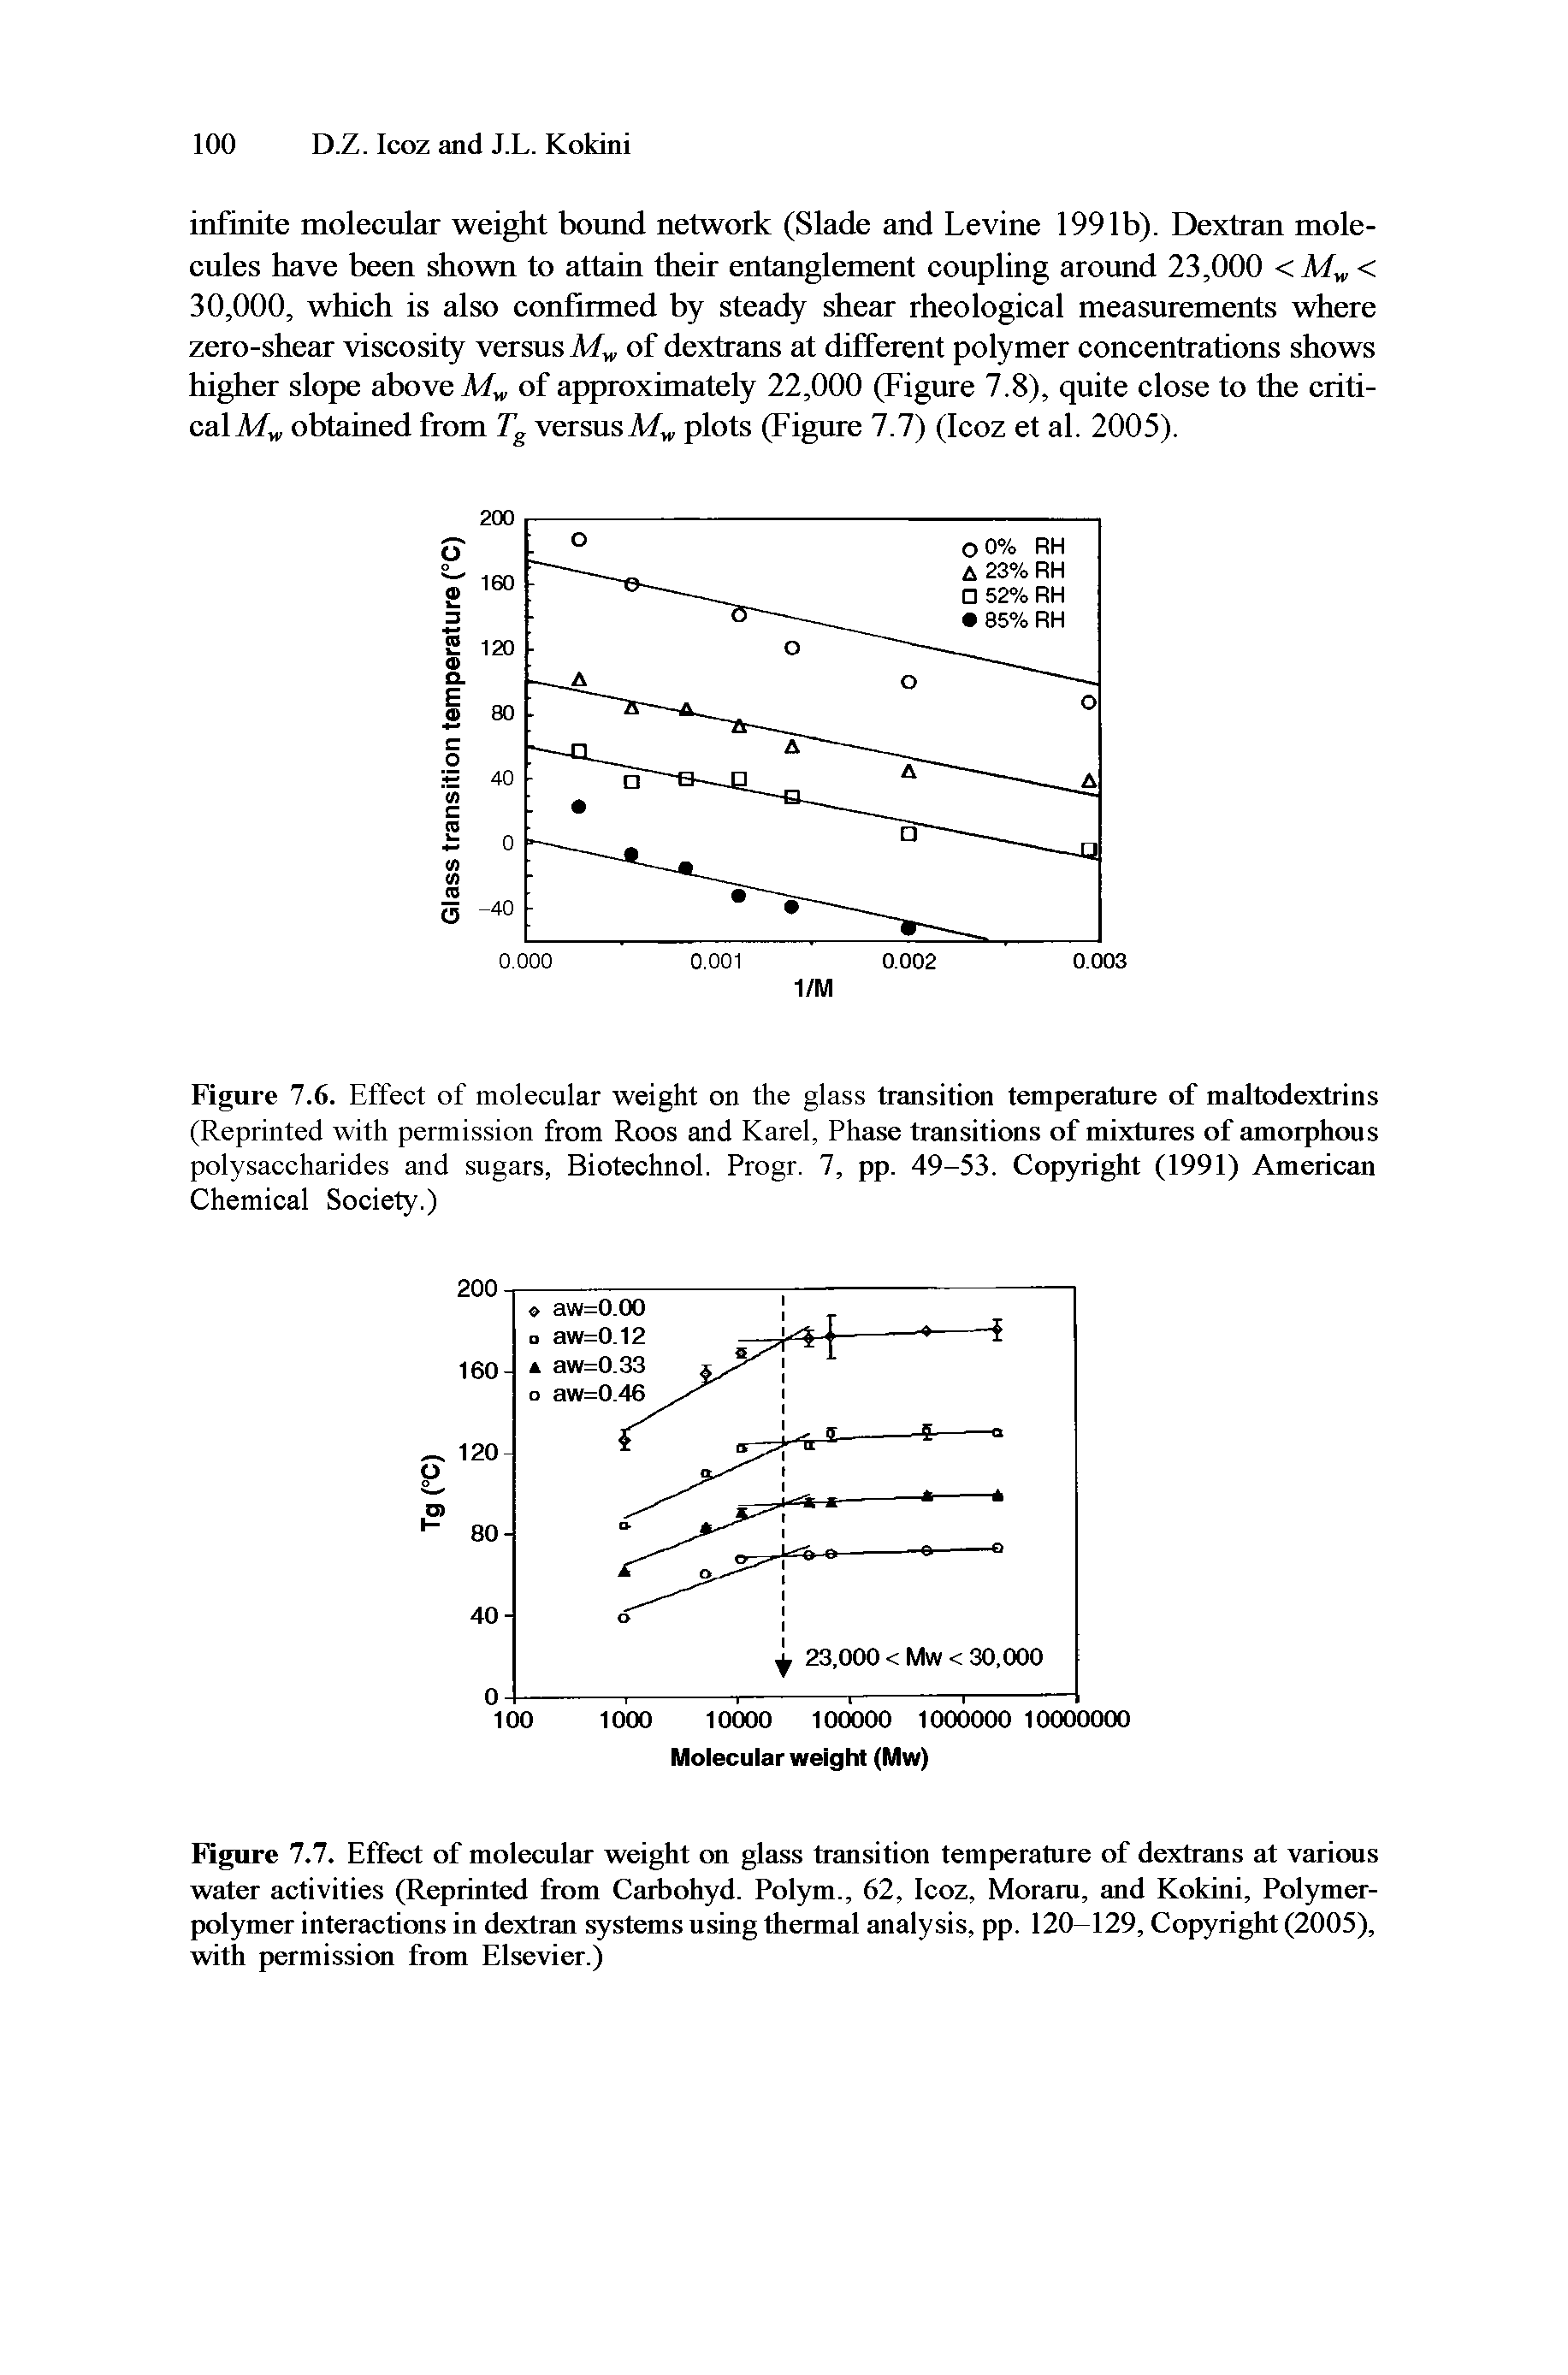 Figure 7.7. Effect of molecular weight on glass transition temperature of dextrans at various water activities (Reprinted from Carbohyd. Polym., 62, Icoz, Moraru, and Kokini, Polymer-polymer interactions in dextran systems using thermal analysis, pp. 120-129, Copyright (2005), with permission from Elsevier.)...